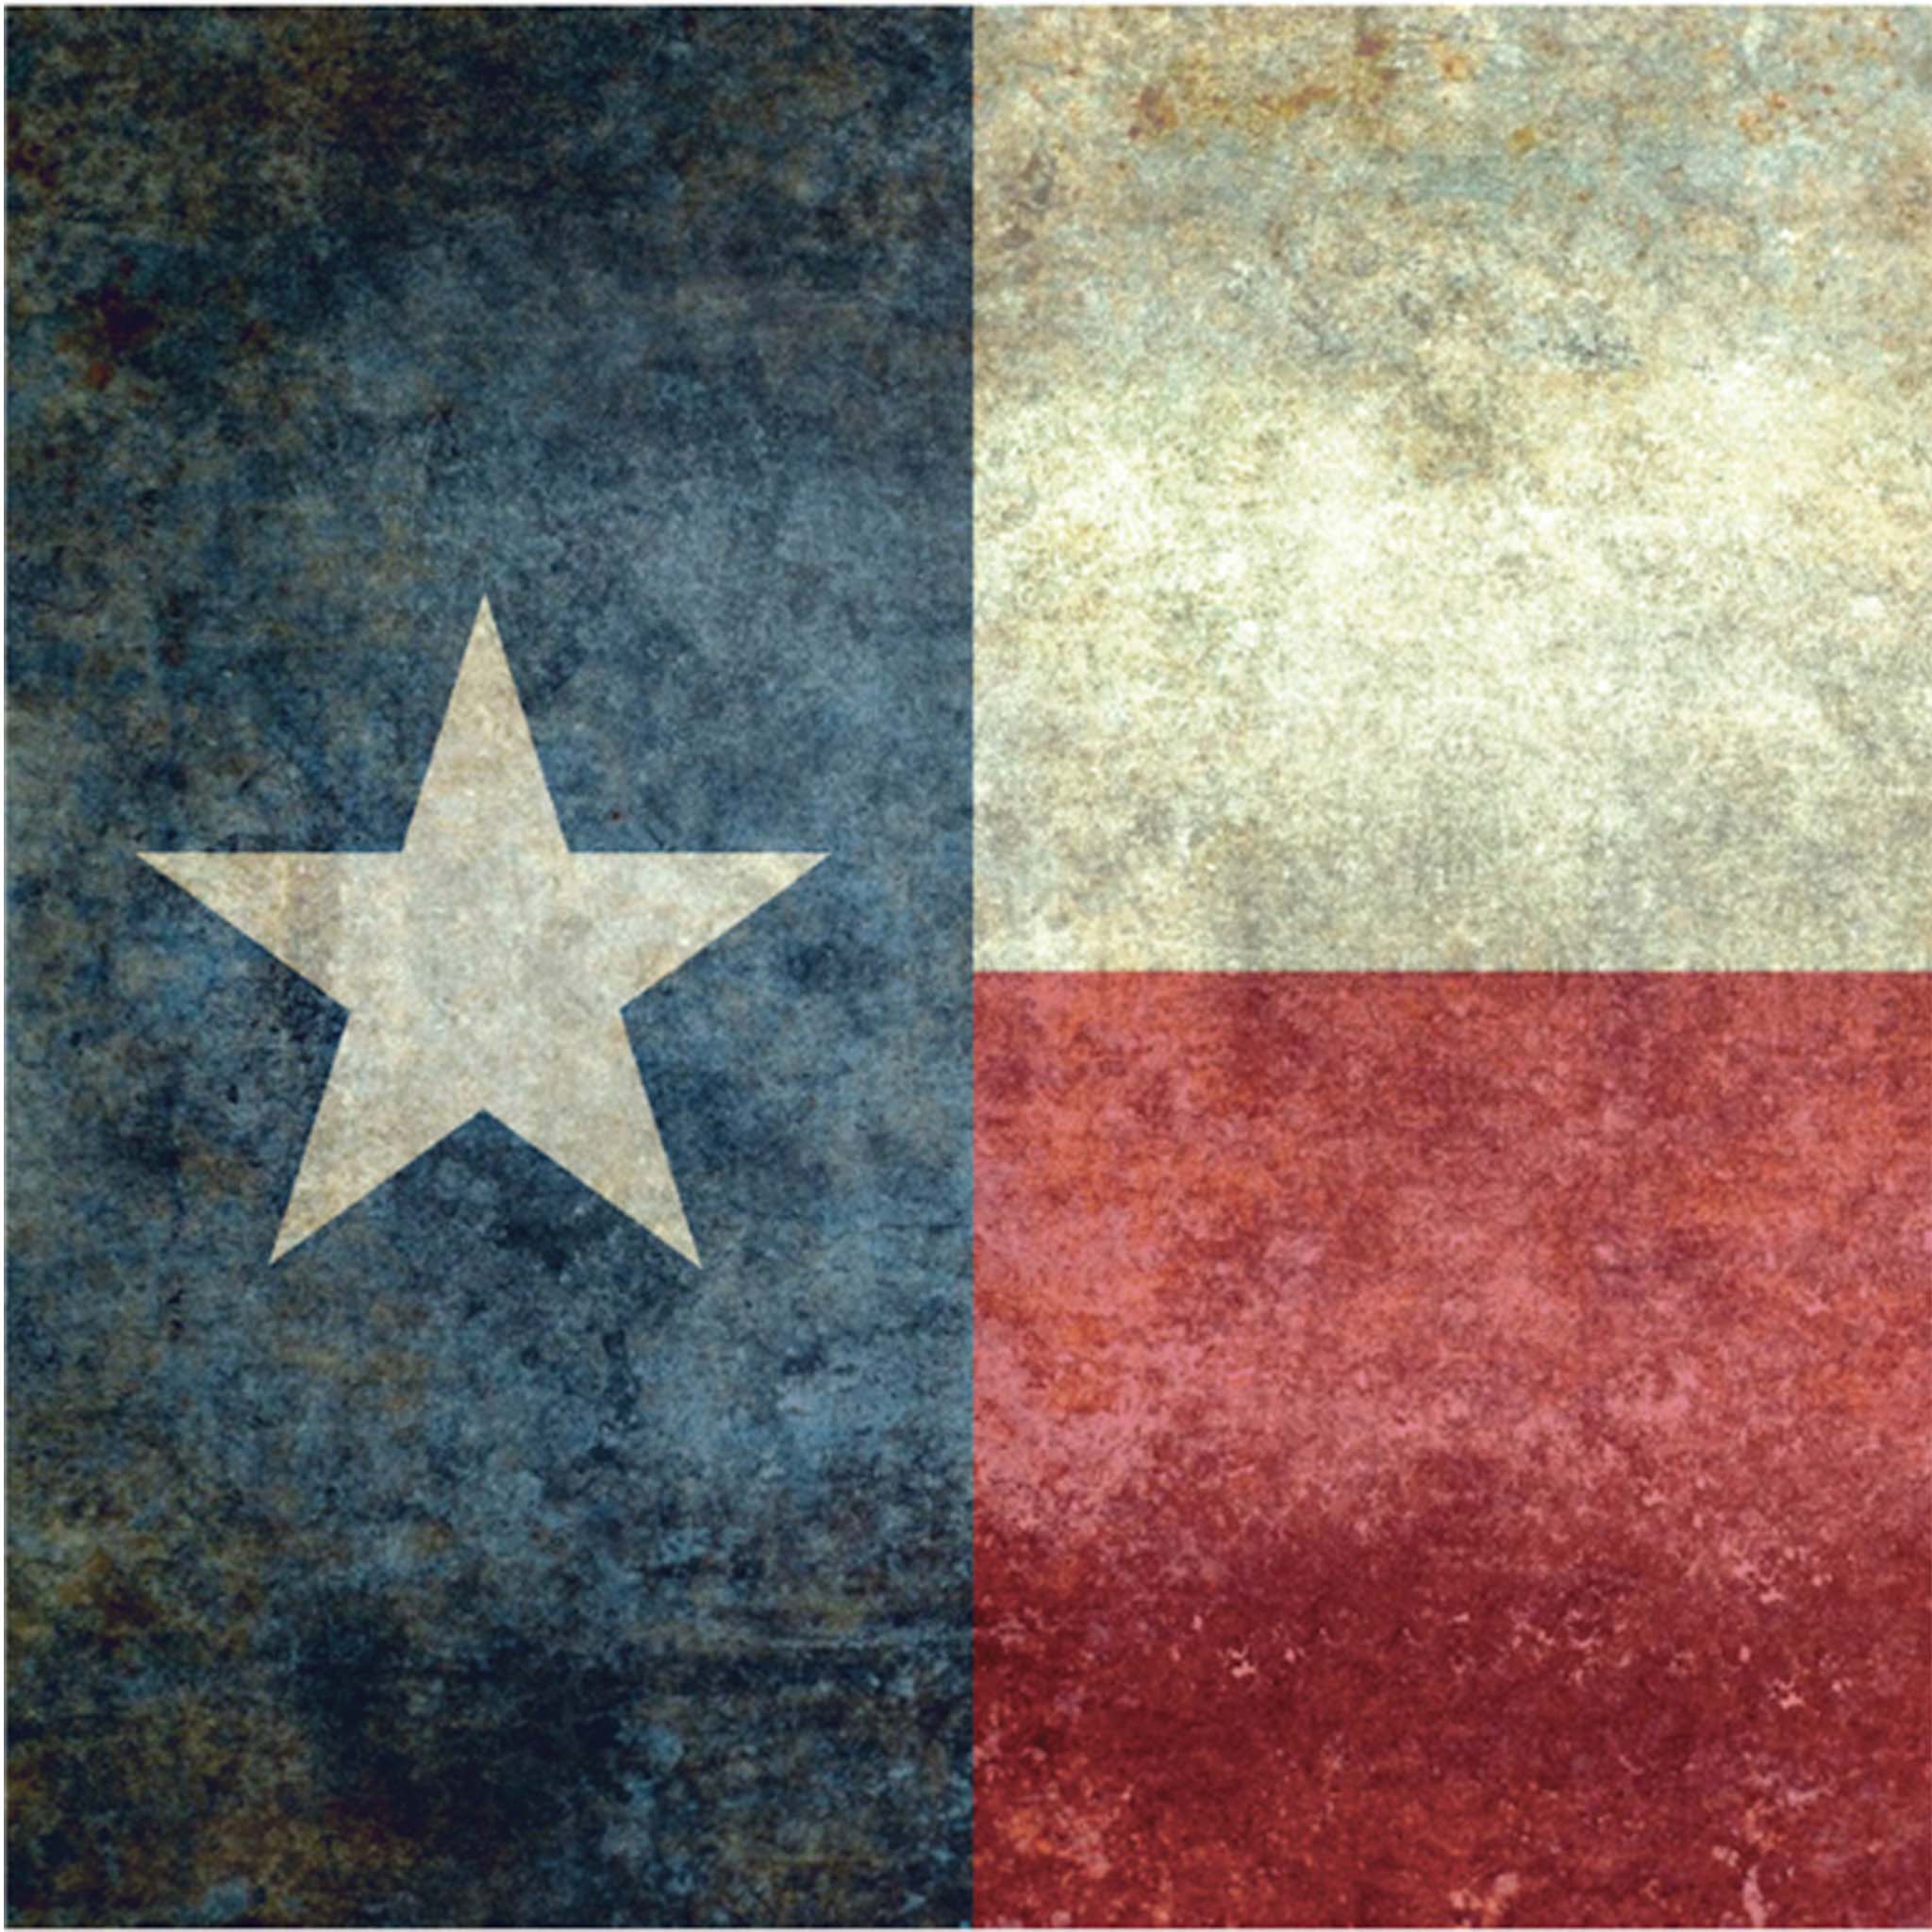 Close-up of an A1 fiber paper that features a distressed Texas flag against a white background.